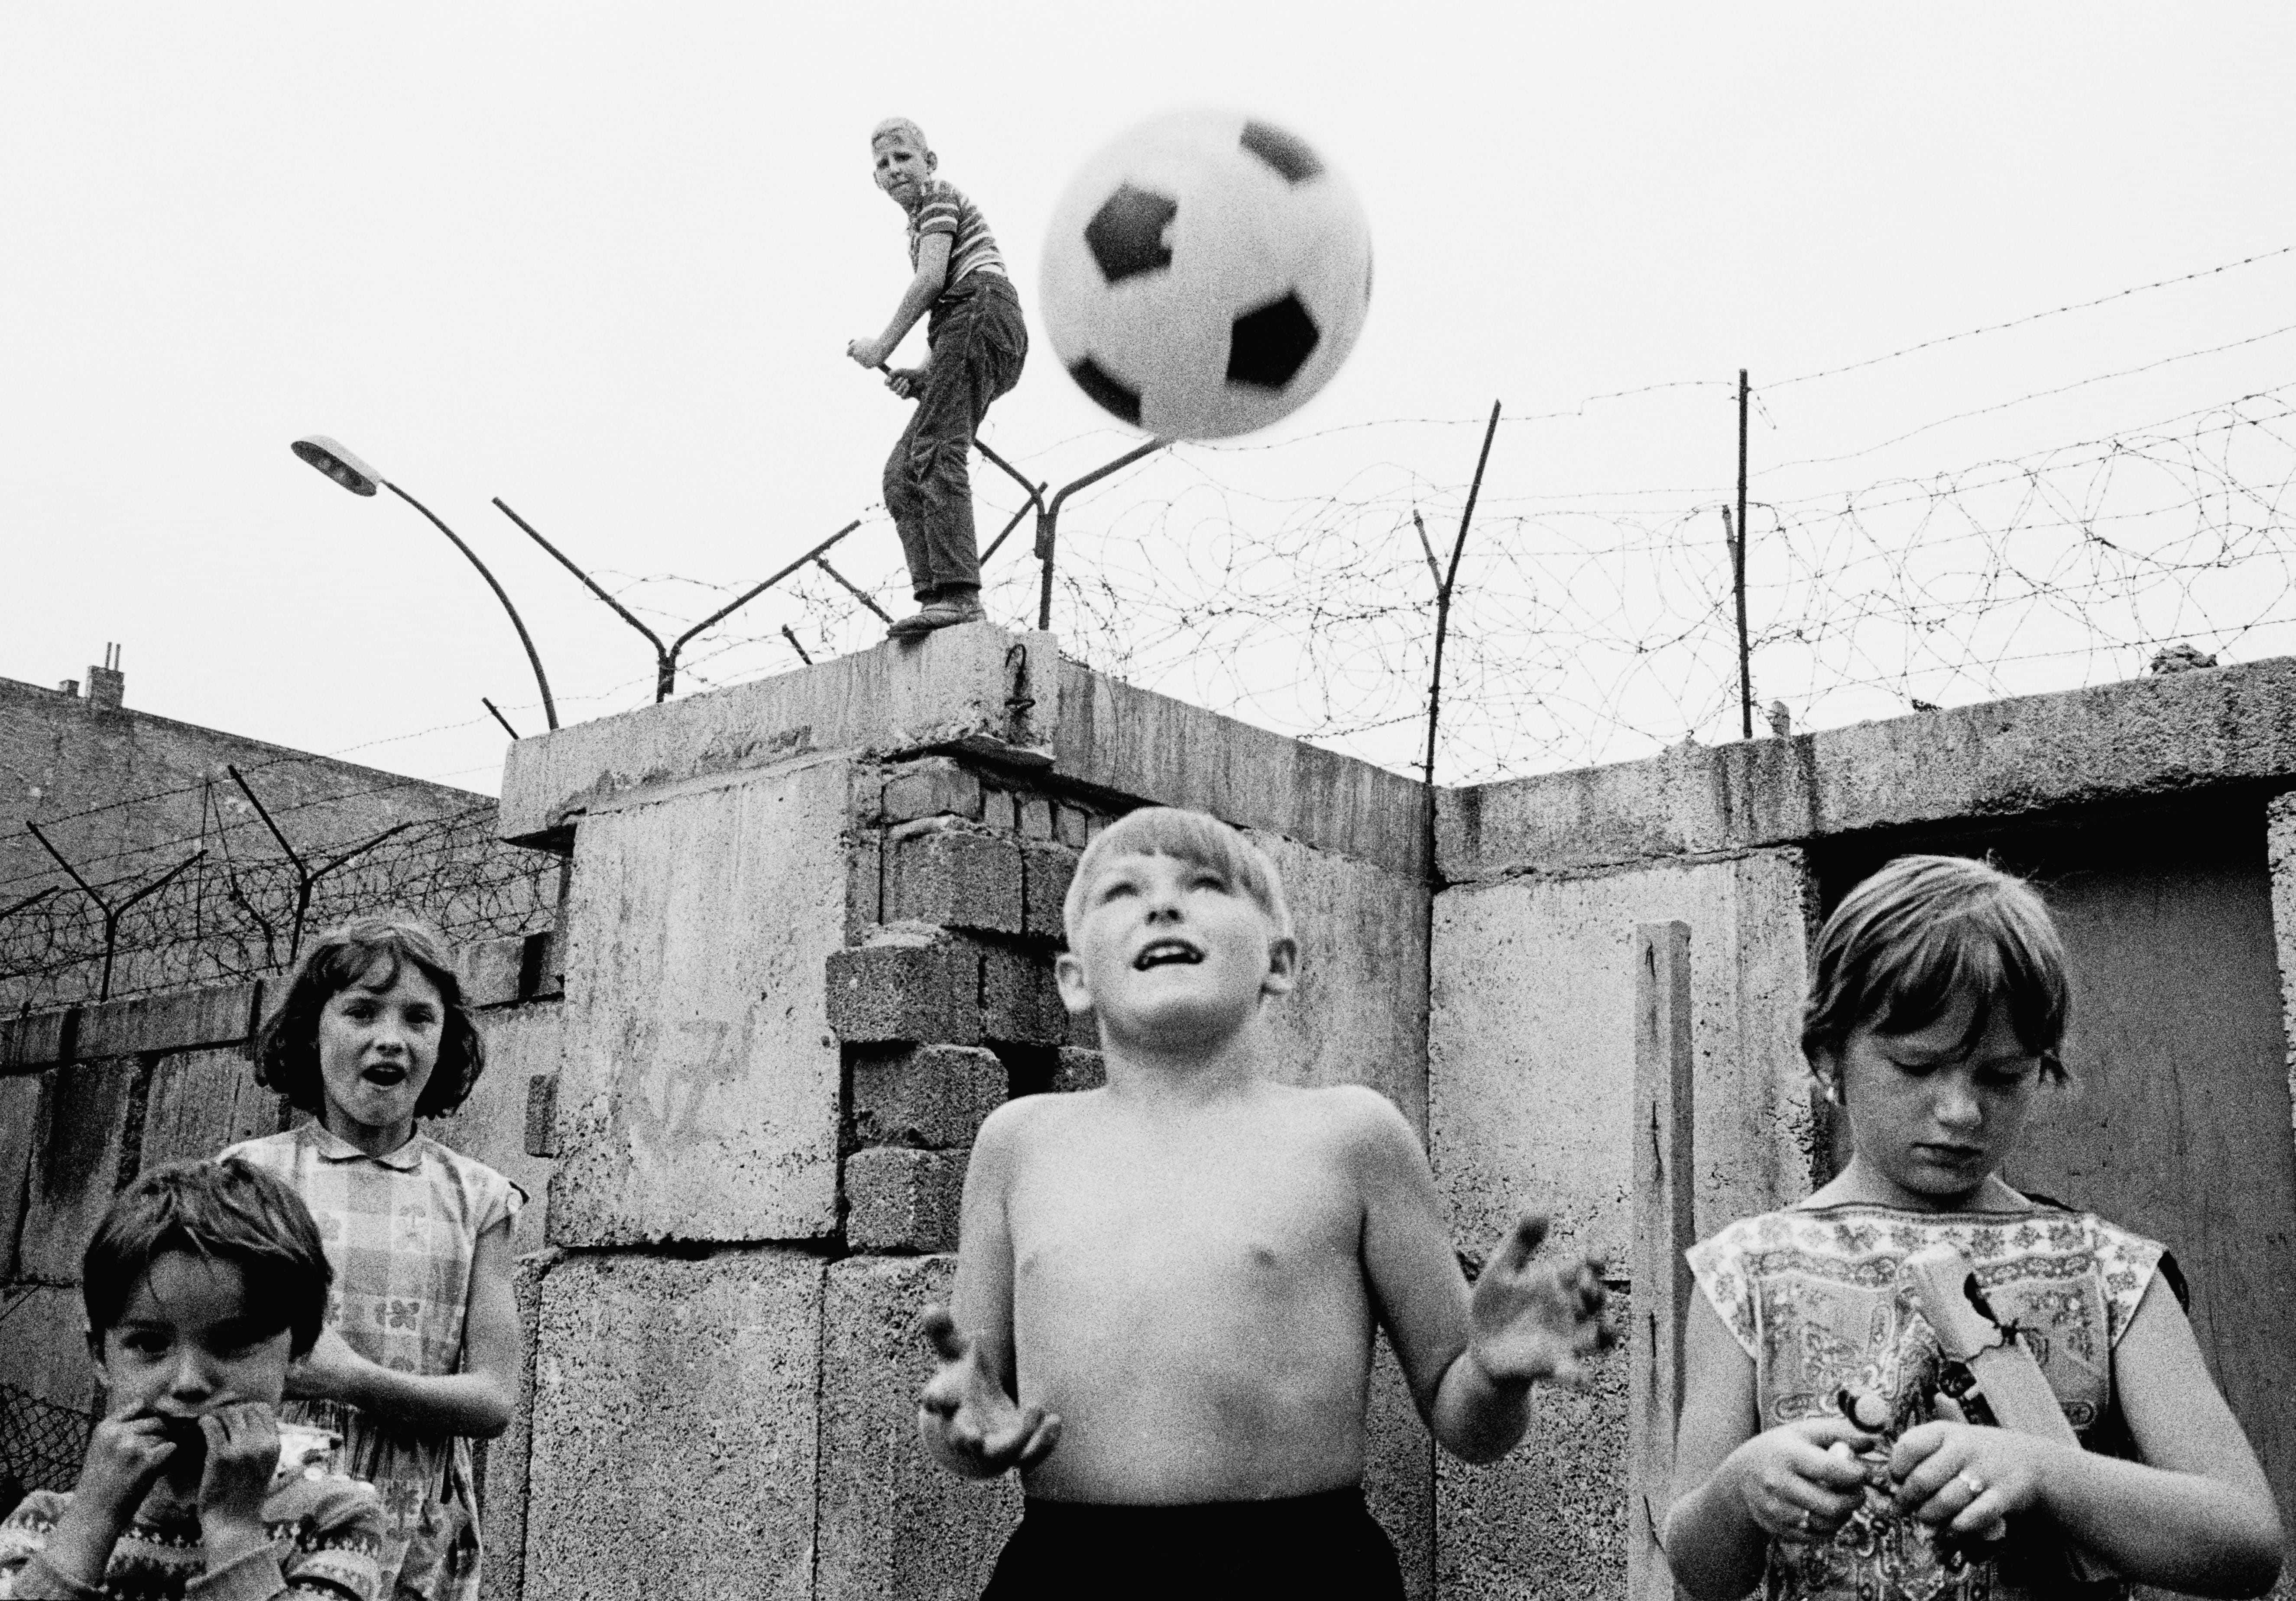 Berlin, Germany. Children playing at the Berlin Wall in Berlin-Wedding, 1963. ©Thomas Hoepker / Magnum Photos